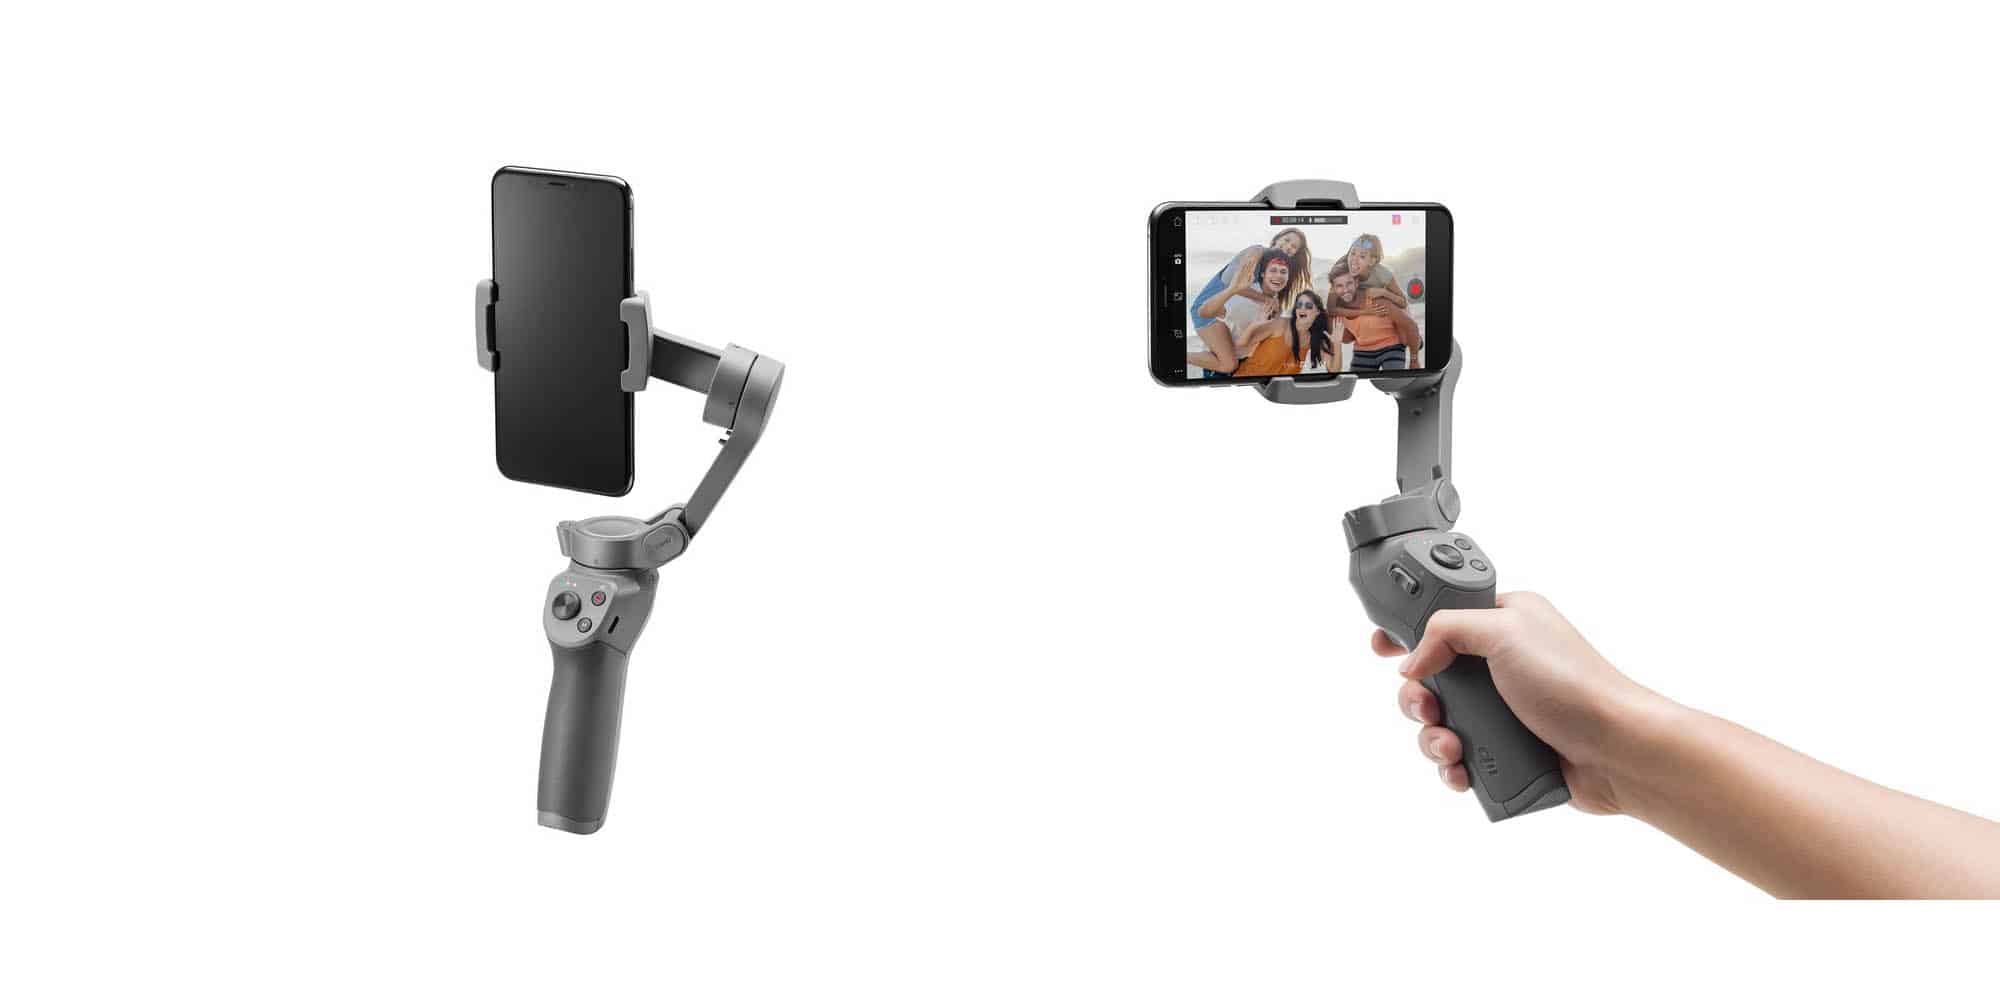 featured image for dji osmo mobile 3 review